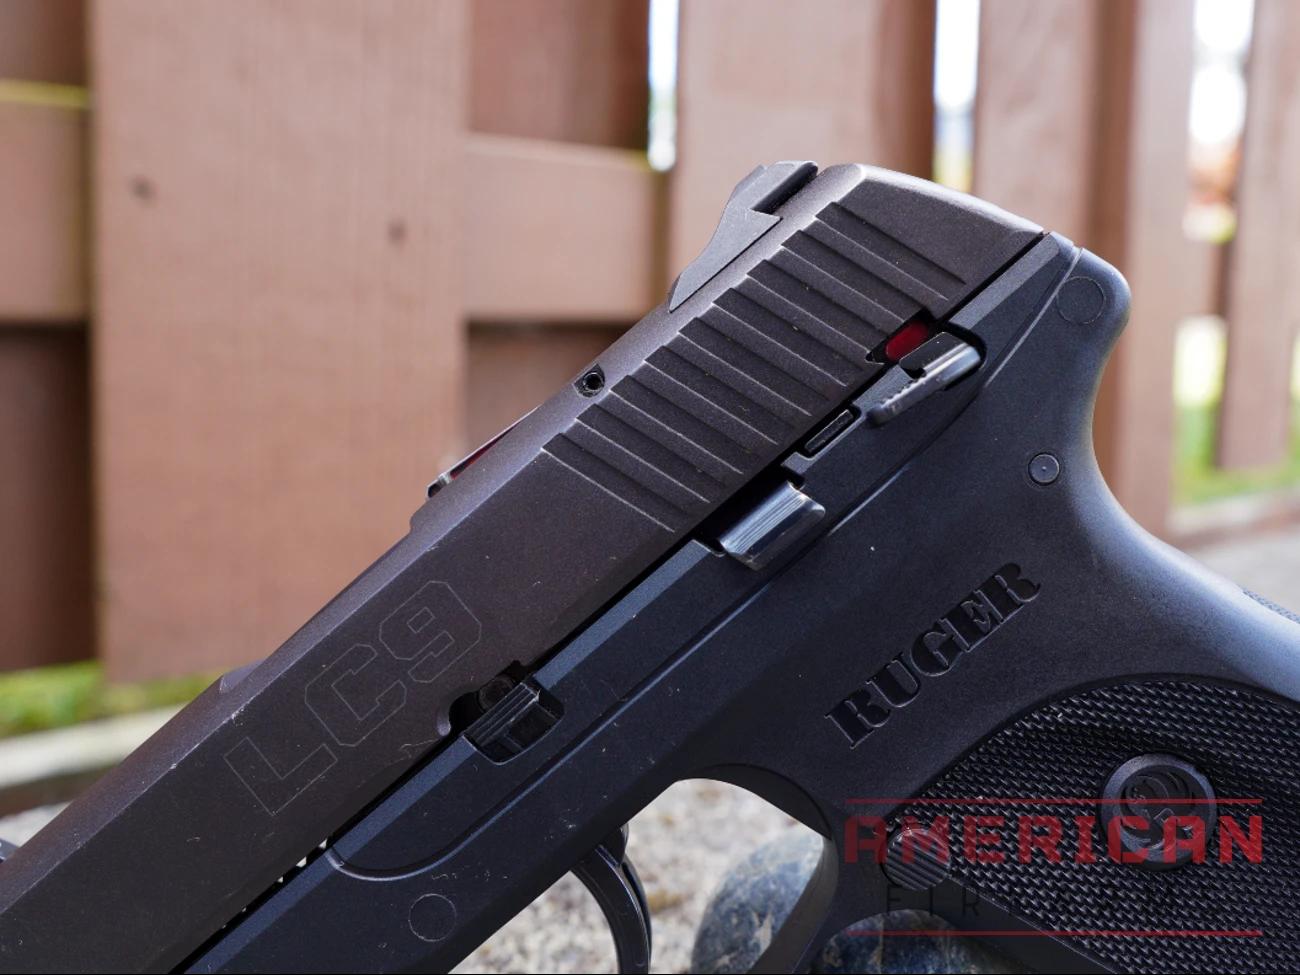 The LC9 has a manual thumb safety, a magazine disconnect safety, and a loaded chamber indicator -- which may be too many safeties for an experienced shooter.